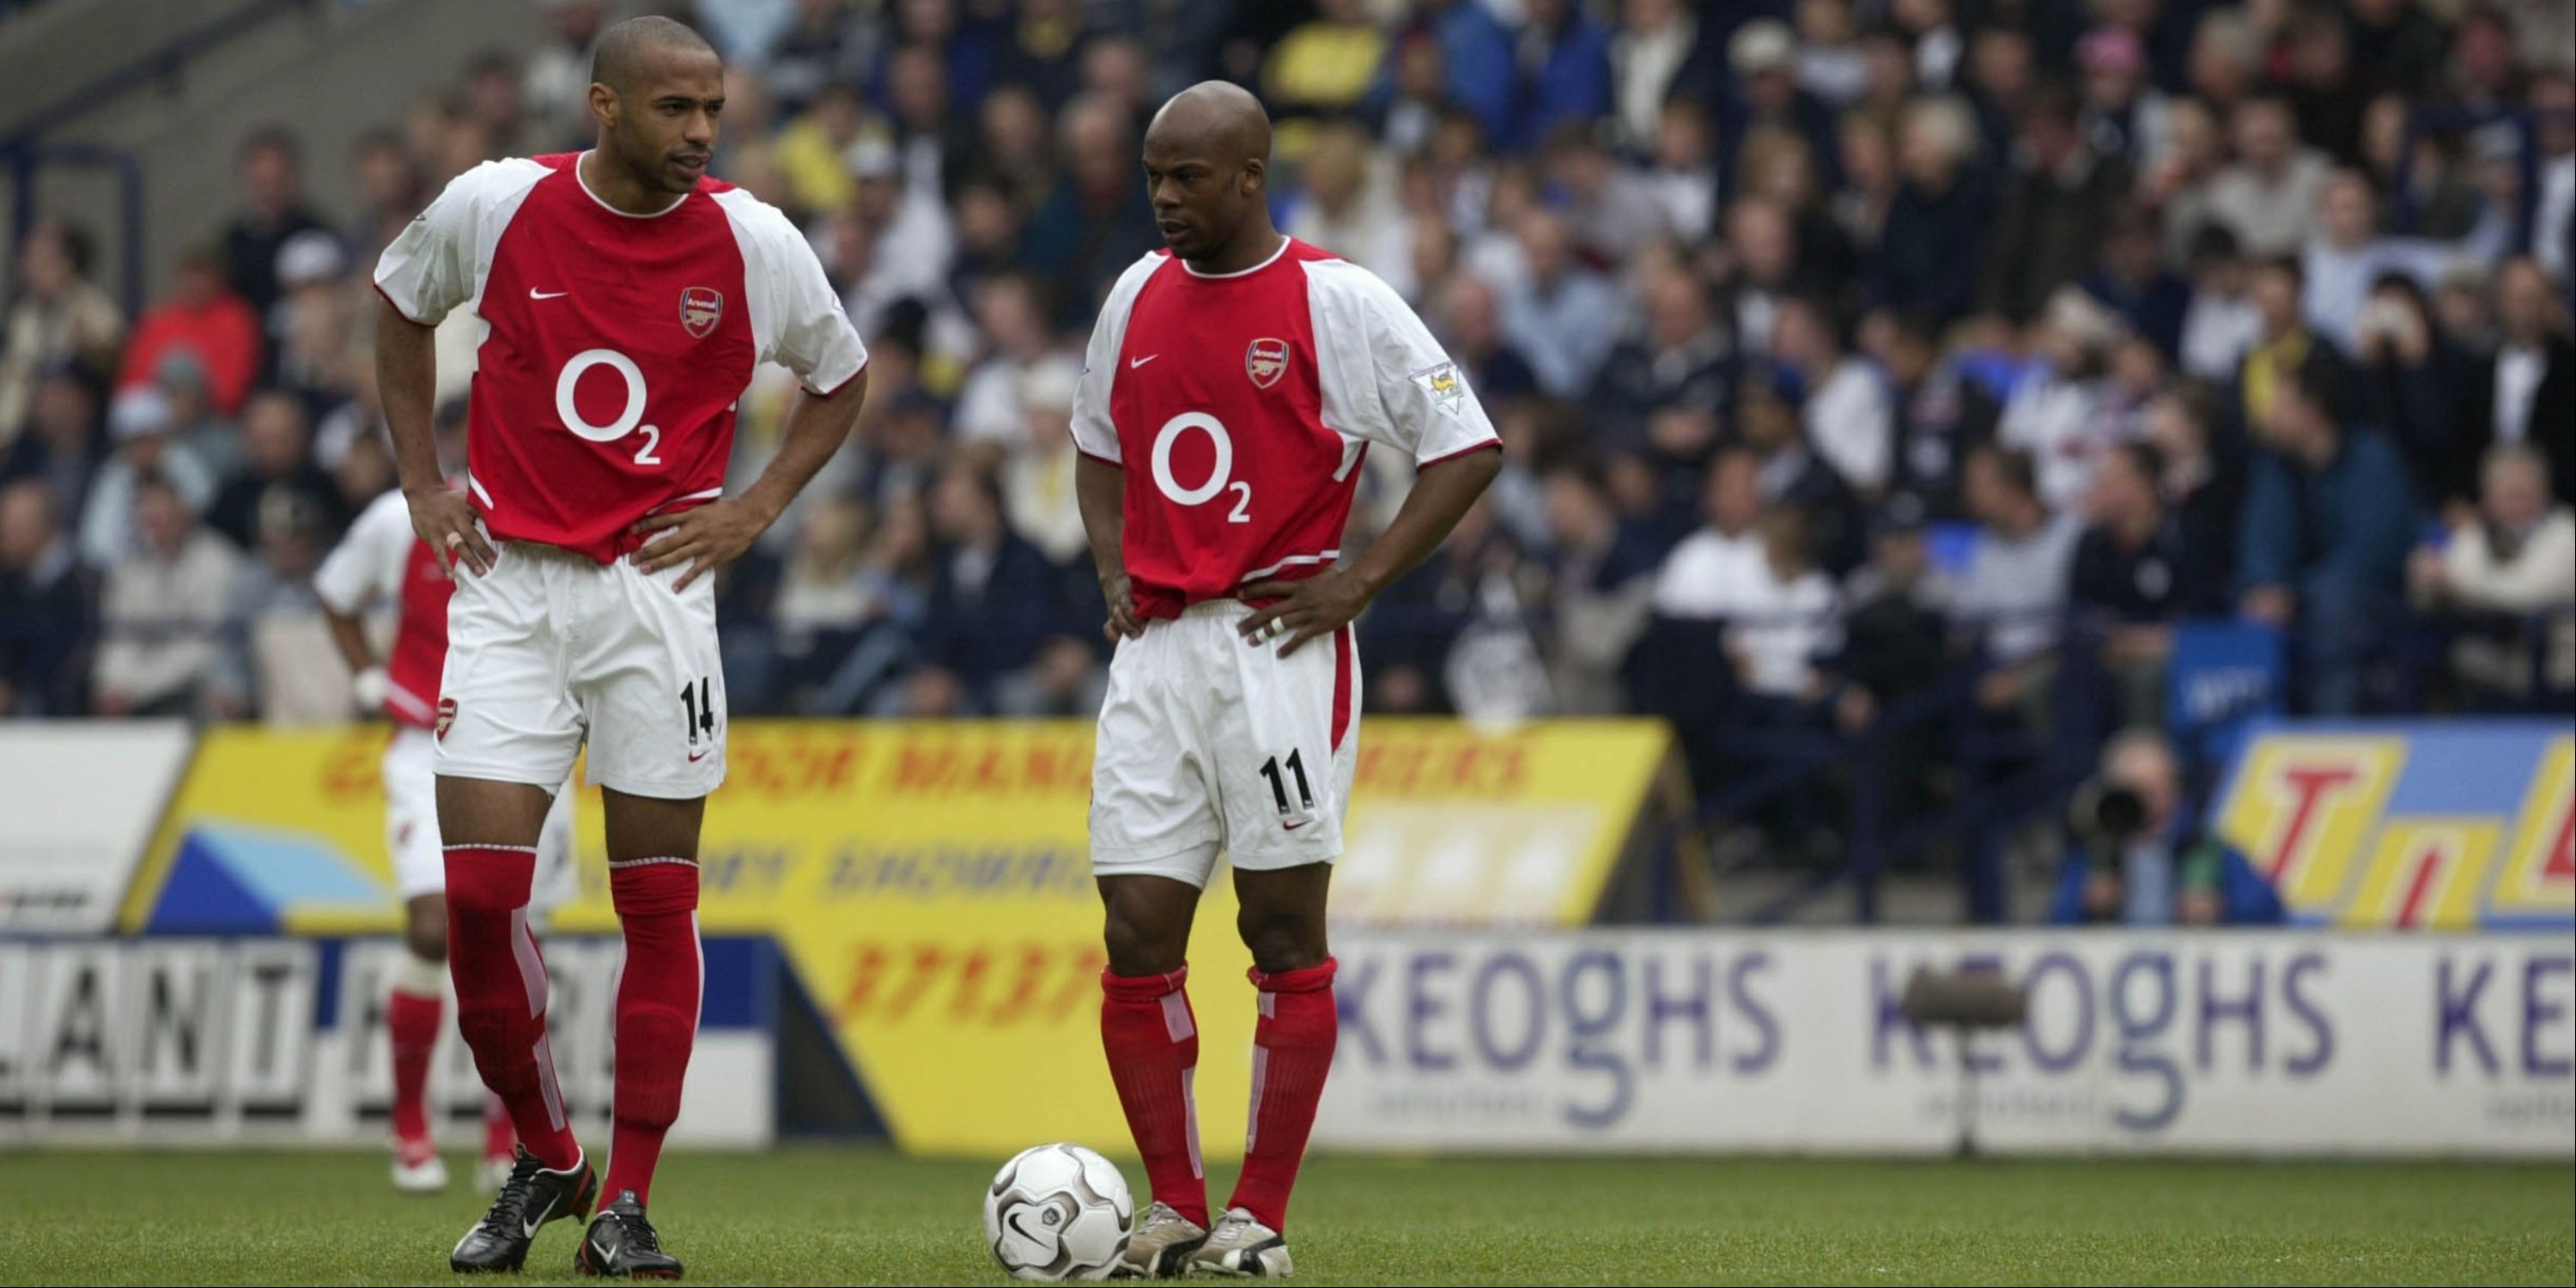 Arsenal's Thierry Henry and Sylvain Wiltord stand over the ball looking dejected.